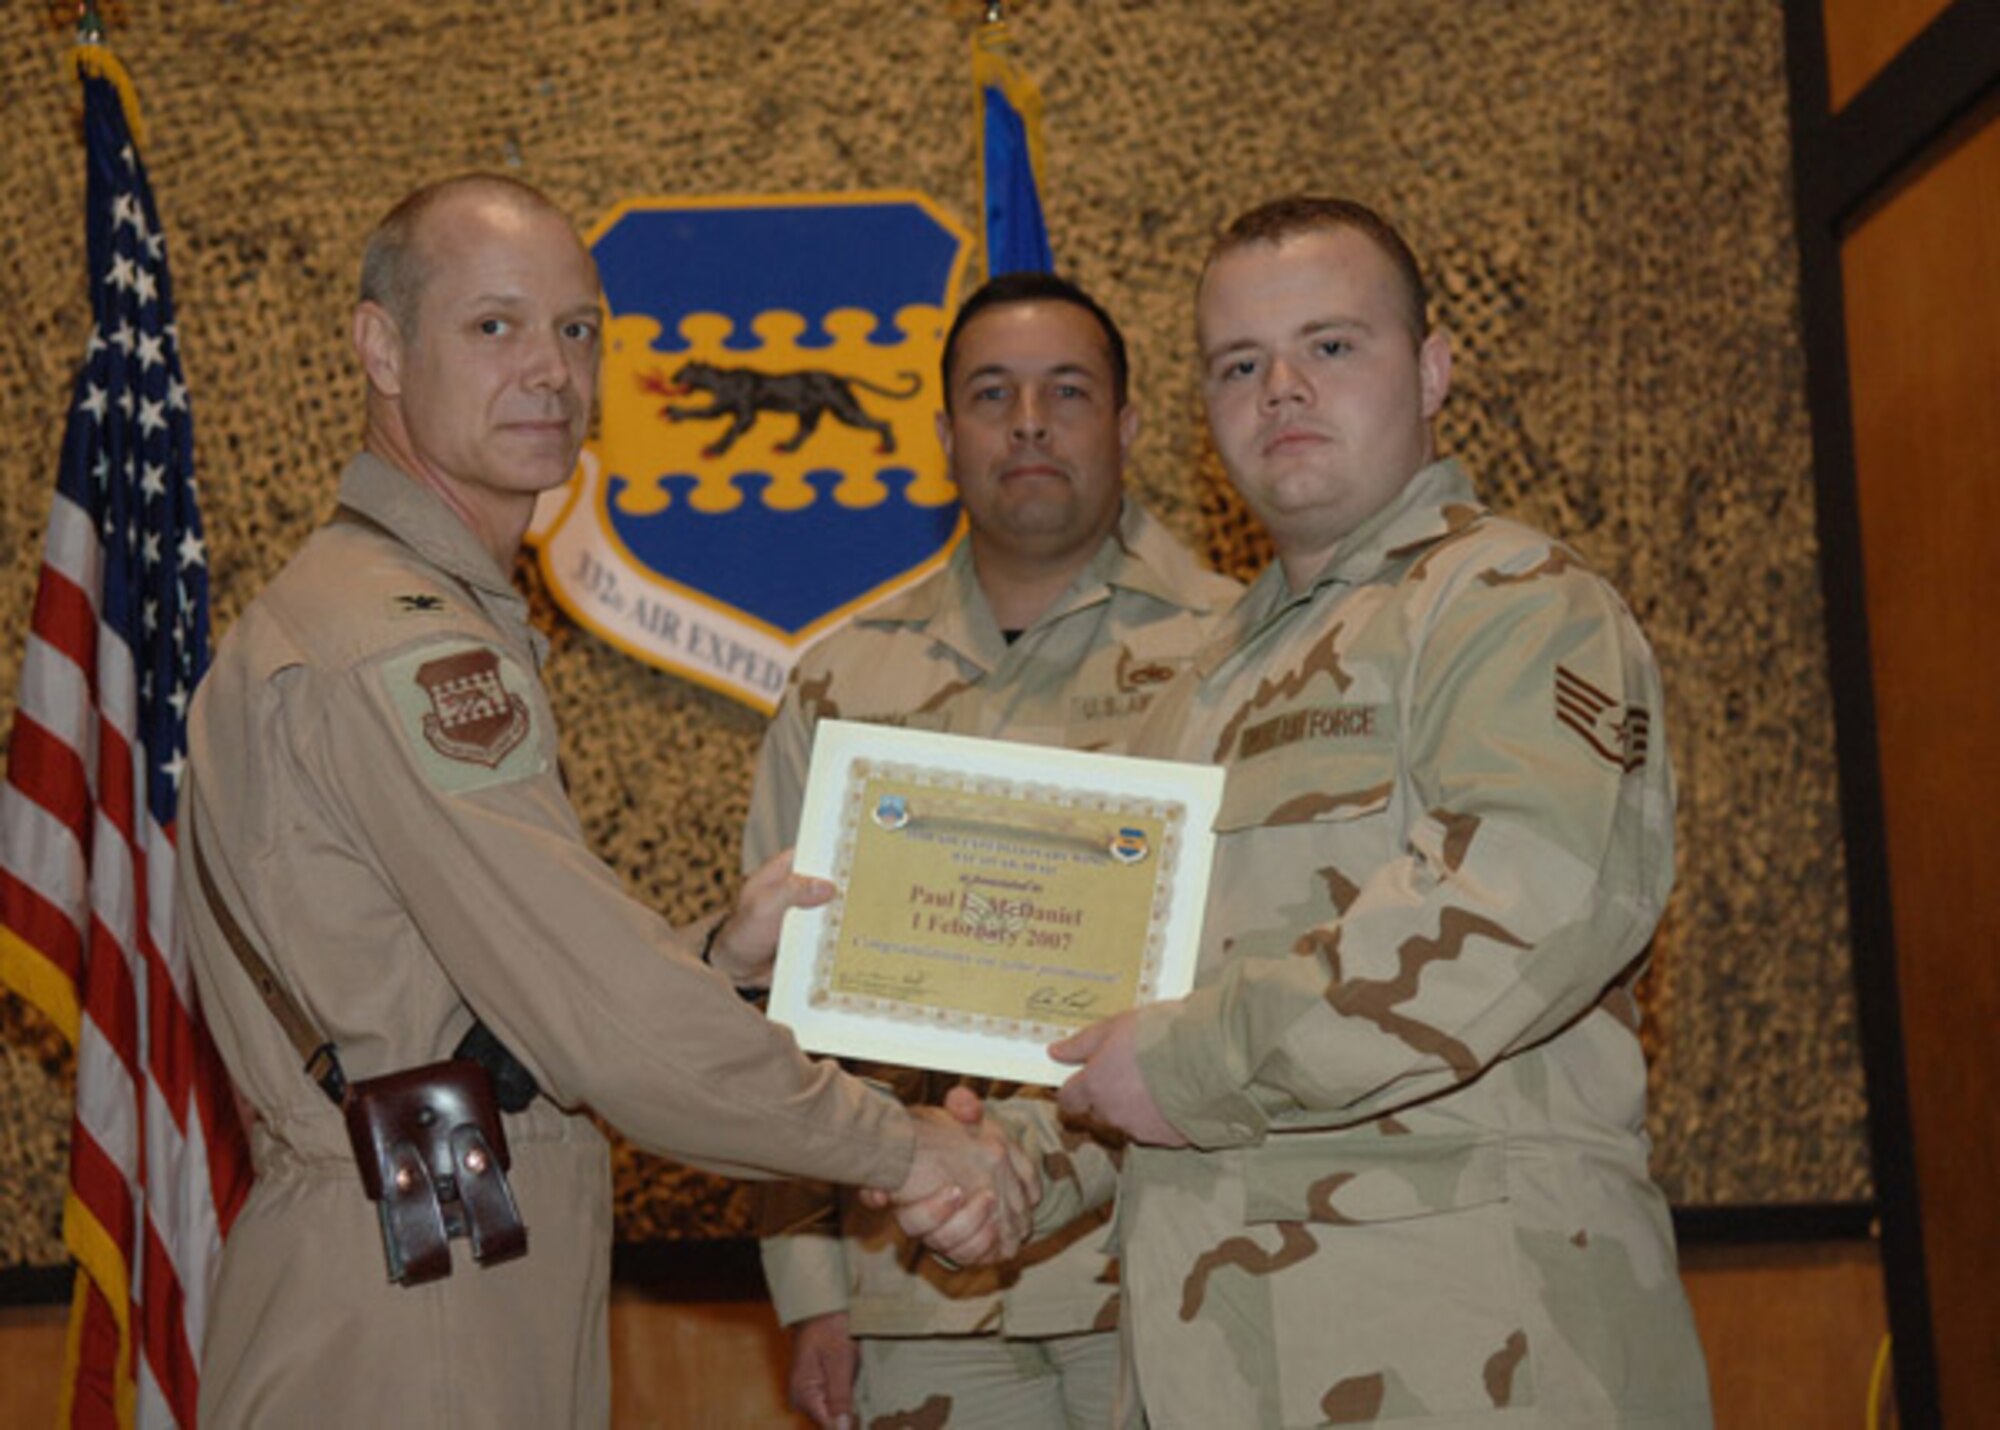 02/02/2007 -- SOUTHWEST ASIA -- Senior Airman Paul McDaniel, 35th Maintenance Operations Squadron, receives a certificiate from his deployed commander at Balad Air Base, Iraq. (U.S. Air Force photo)